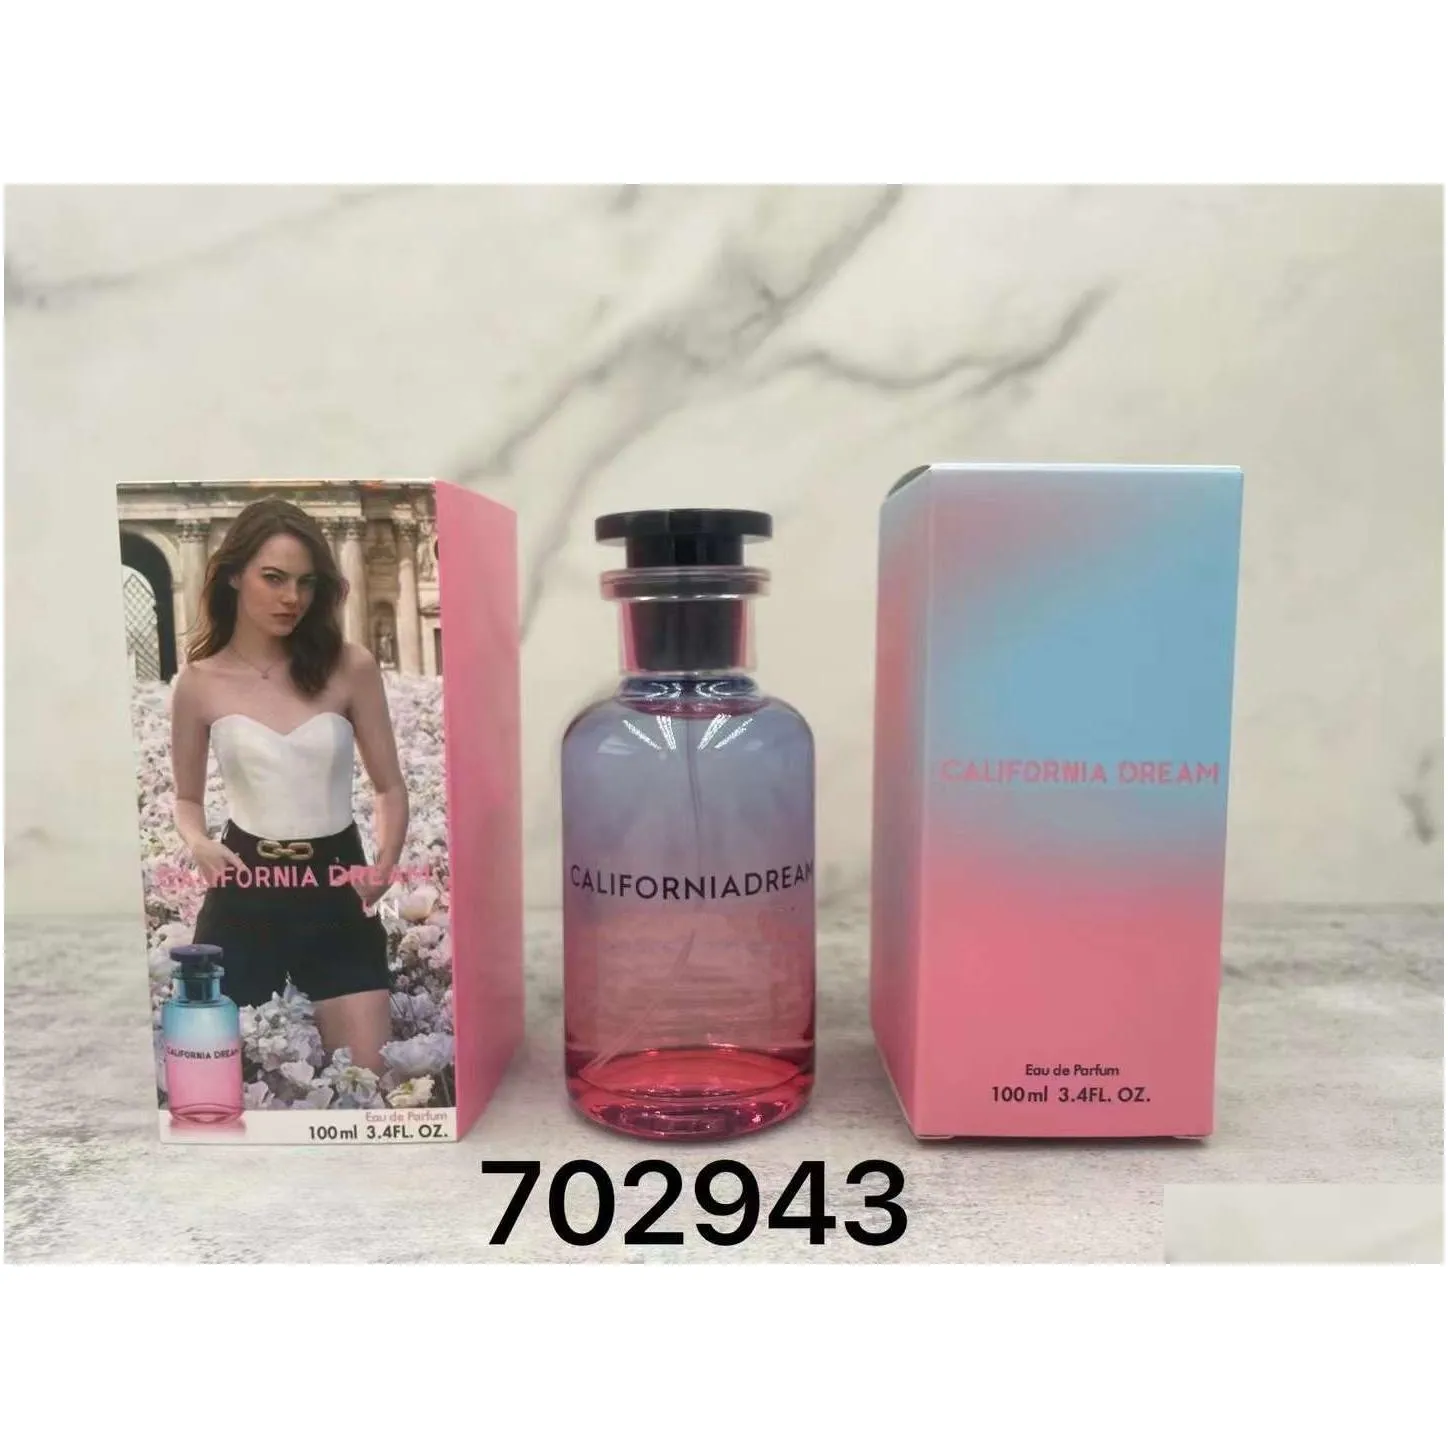 Women Les Sables Roses APOGE MILLE FEUX Contre Moi Le Jour Se Leve Perfume Lady Spray 100ml French brand good smell floral notes fragrance fast postage good